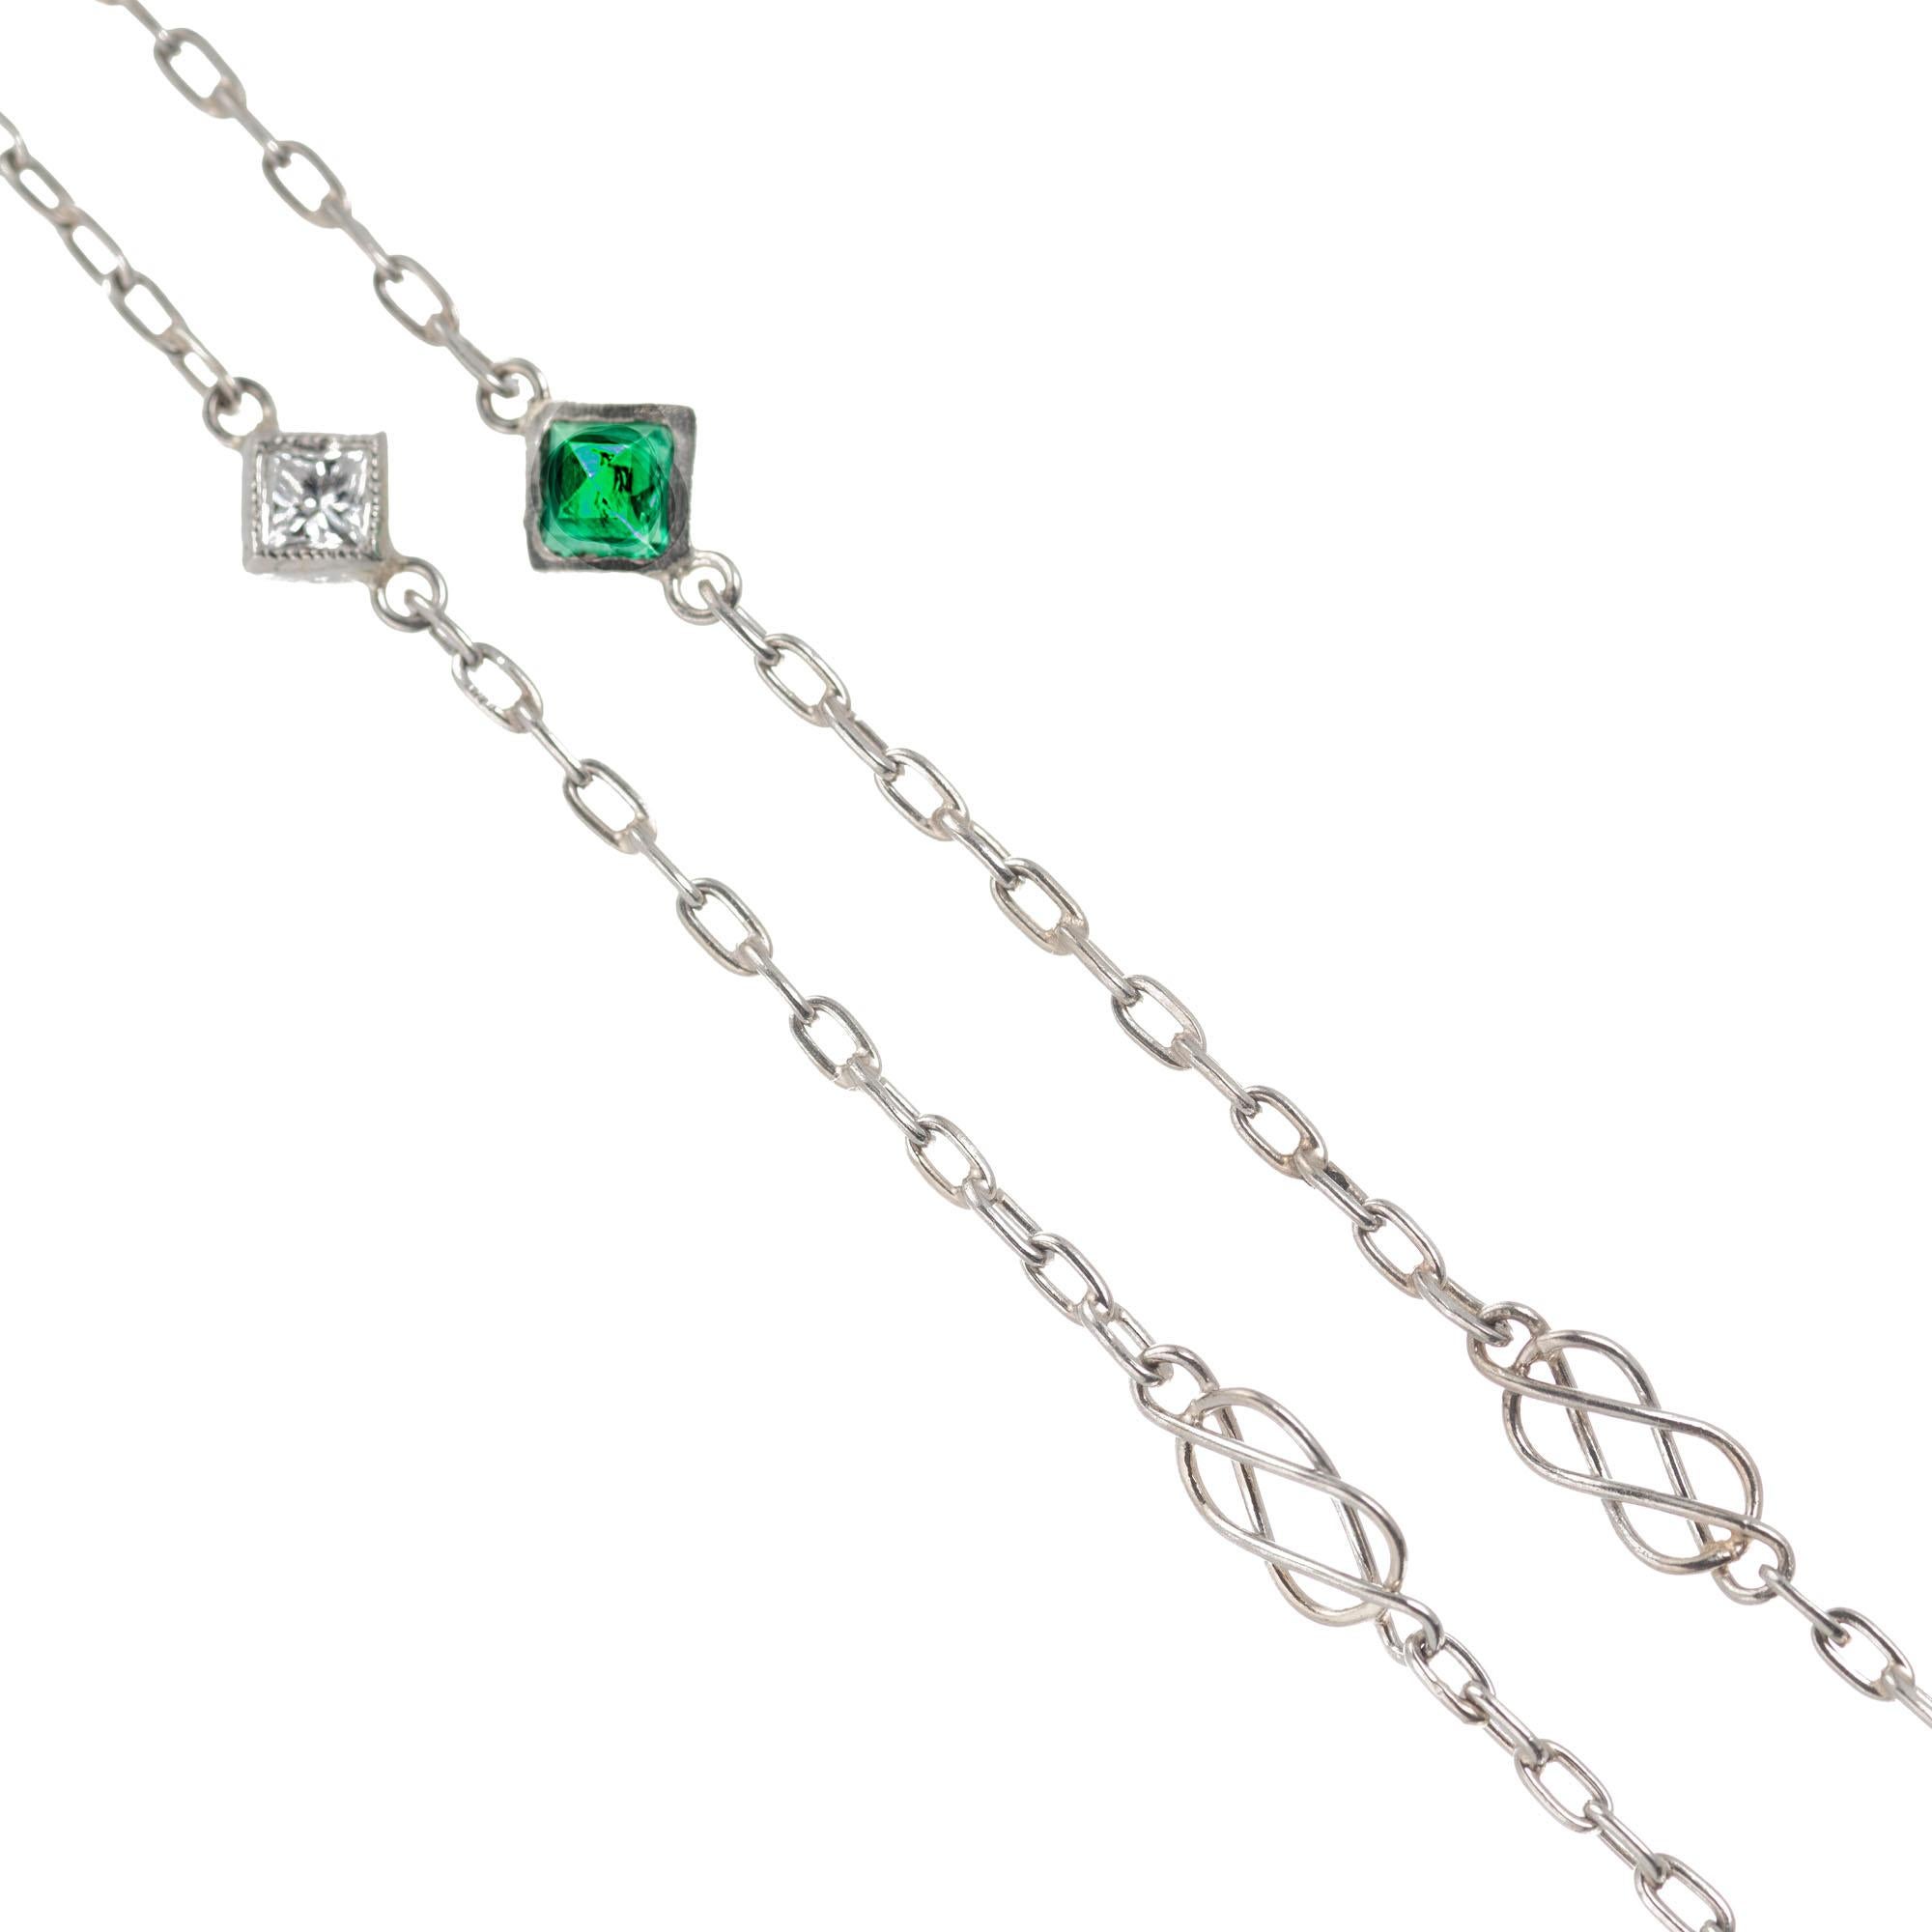 Square emerald and diamond platinum diamond by the yard necklace. Chain is 44 inches and can be worn long or doubled.

10 square cut green emeralds MI, approx. .50cts
10 princess cut diamonds I-J VS, approx. .80cts
Platinum 
Stamped: PT950
8.7